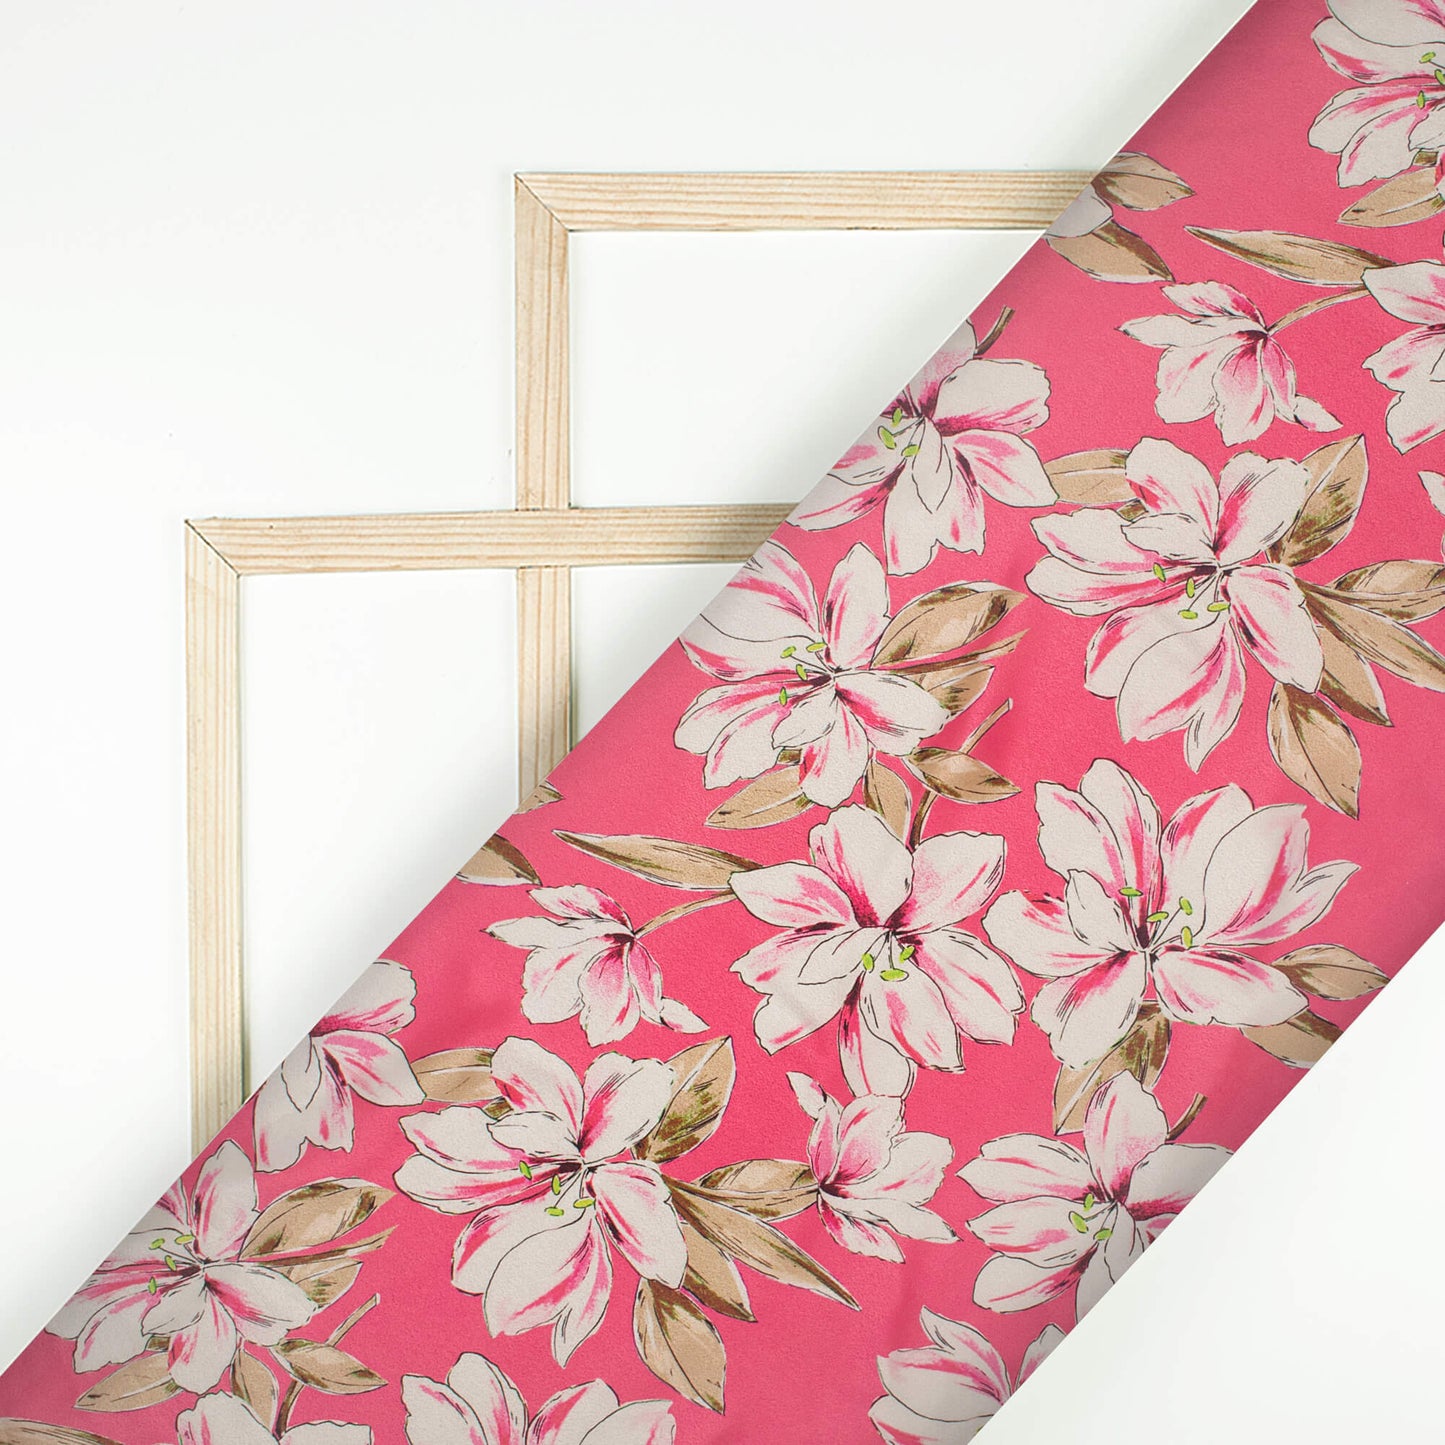 Hot Pink And White Floral Digital Print Crepe Silk Fabric